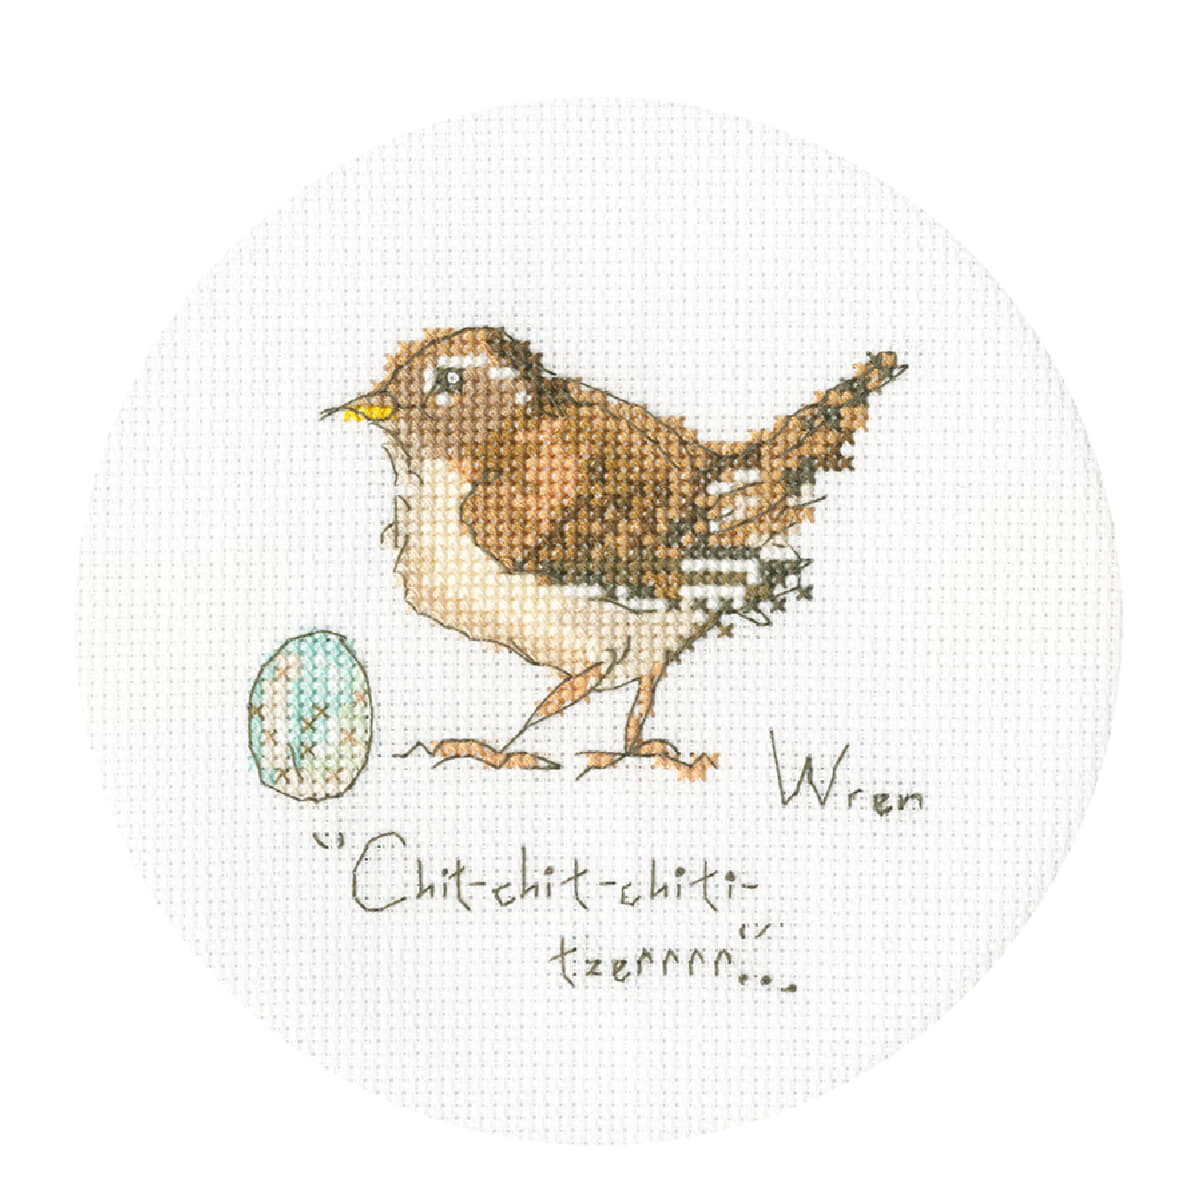 A cross stitch design (embroidery picture) showing a...